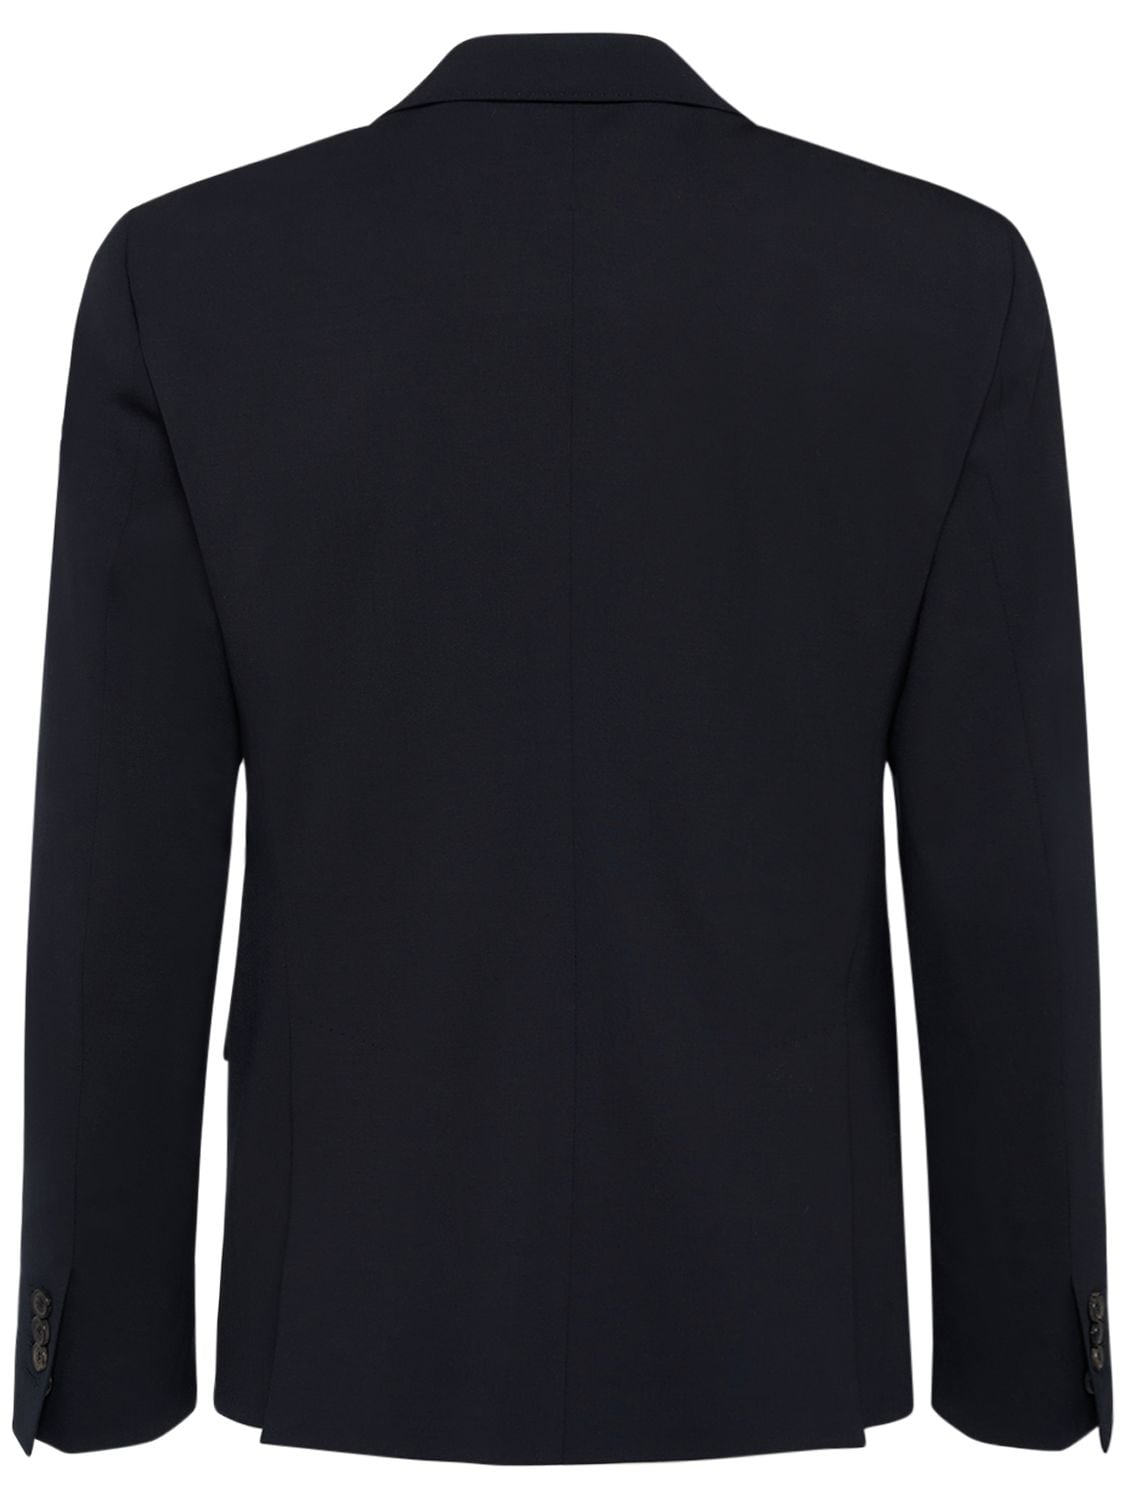 Shop Dsquared2 London Stretch Wool Suit In Black